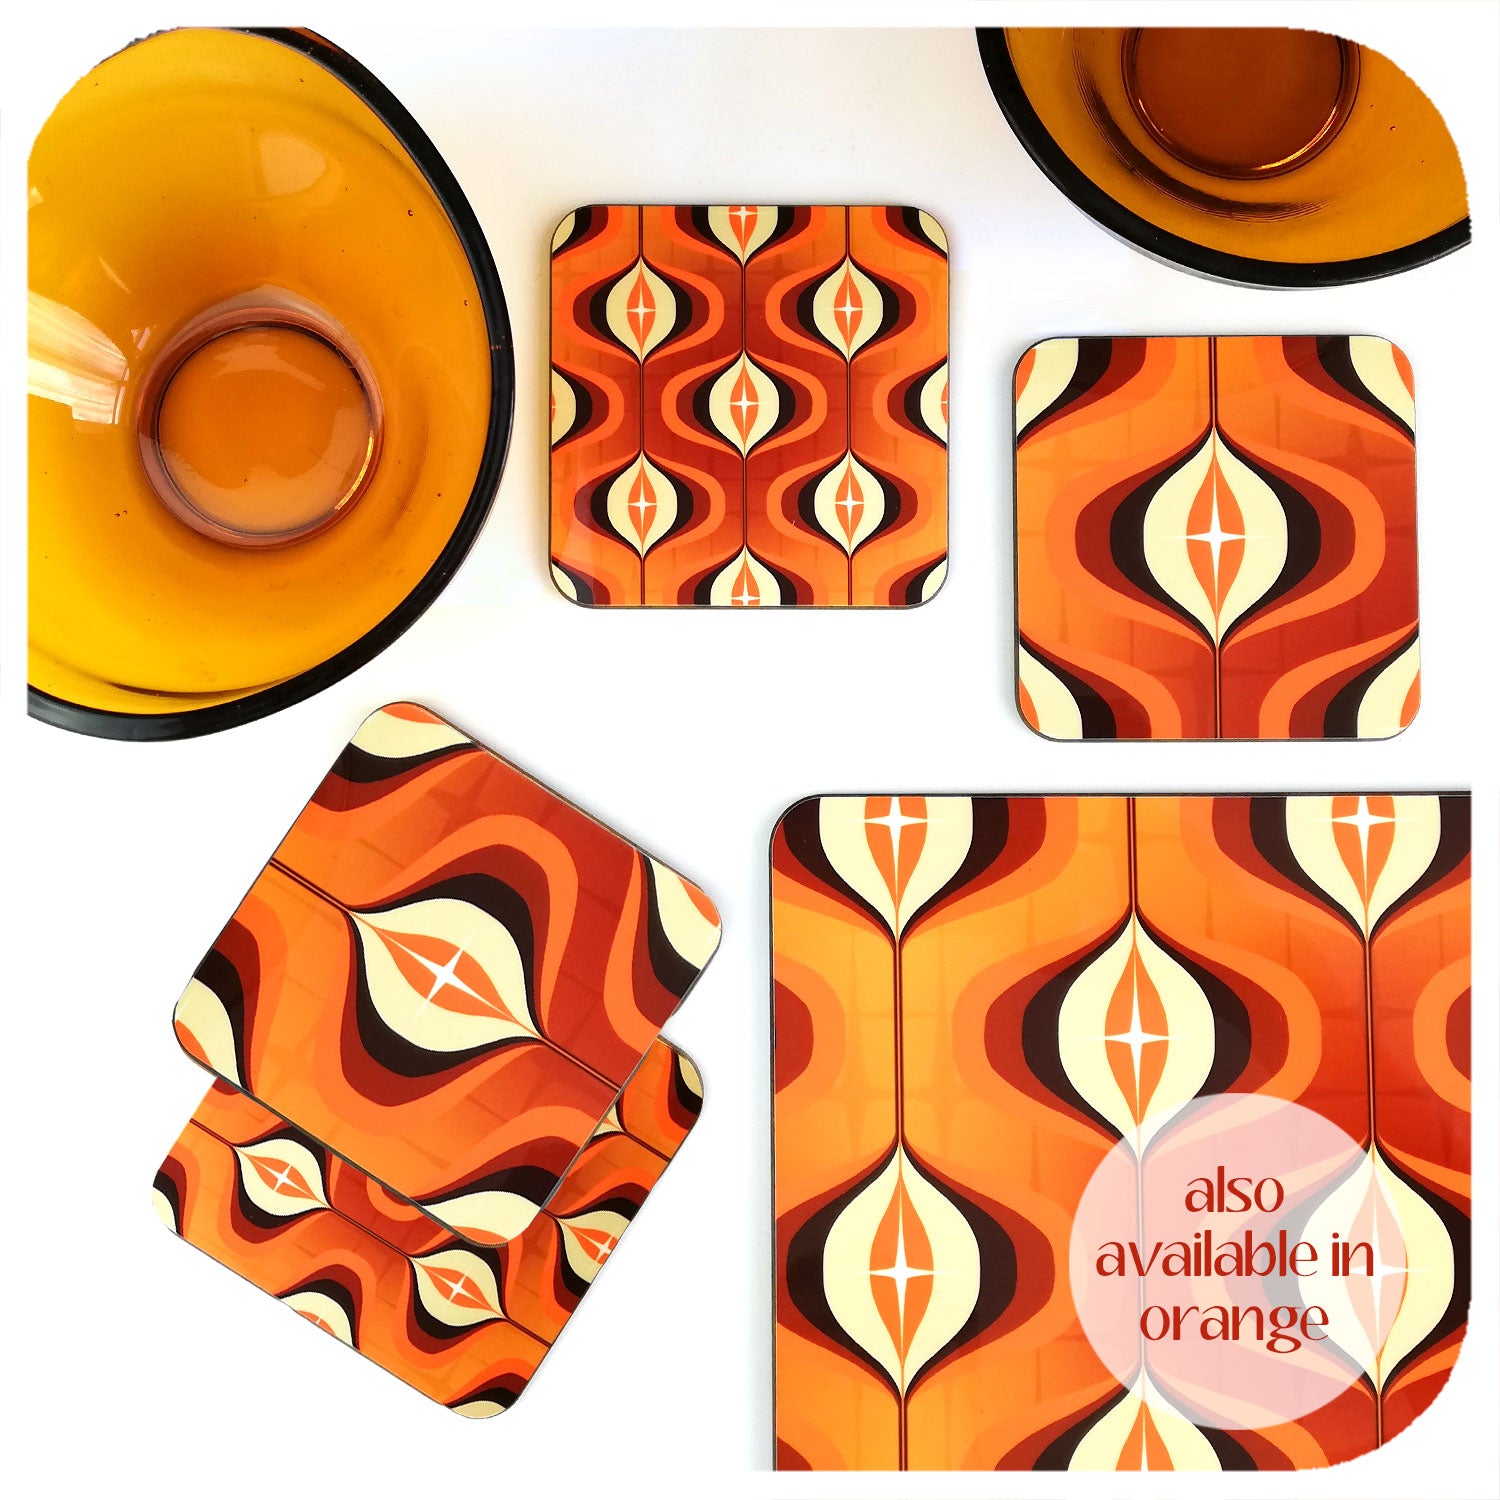 1970s Op Art Placemats & coasters in orange | The Inkabilly Emporium